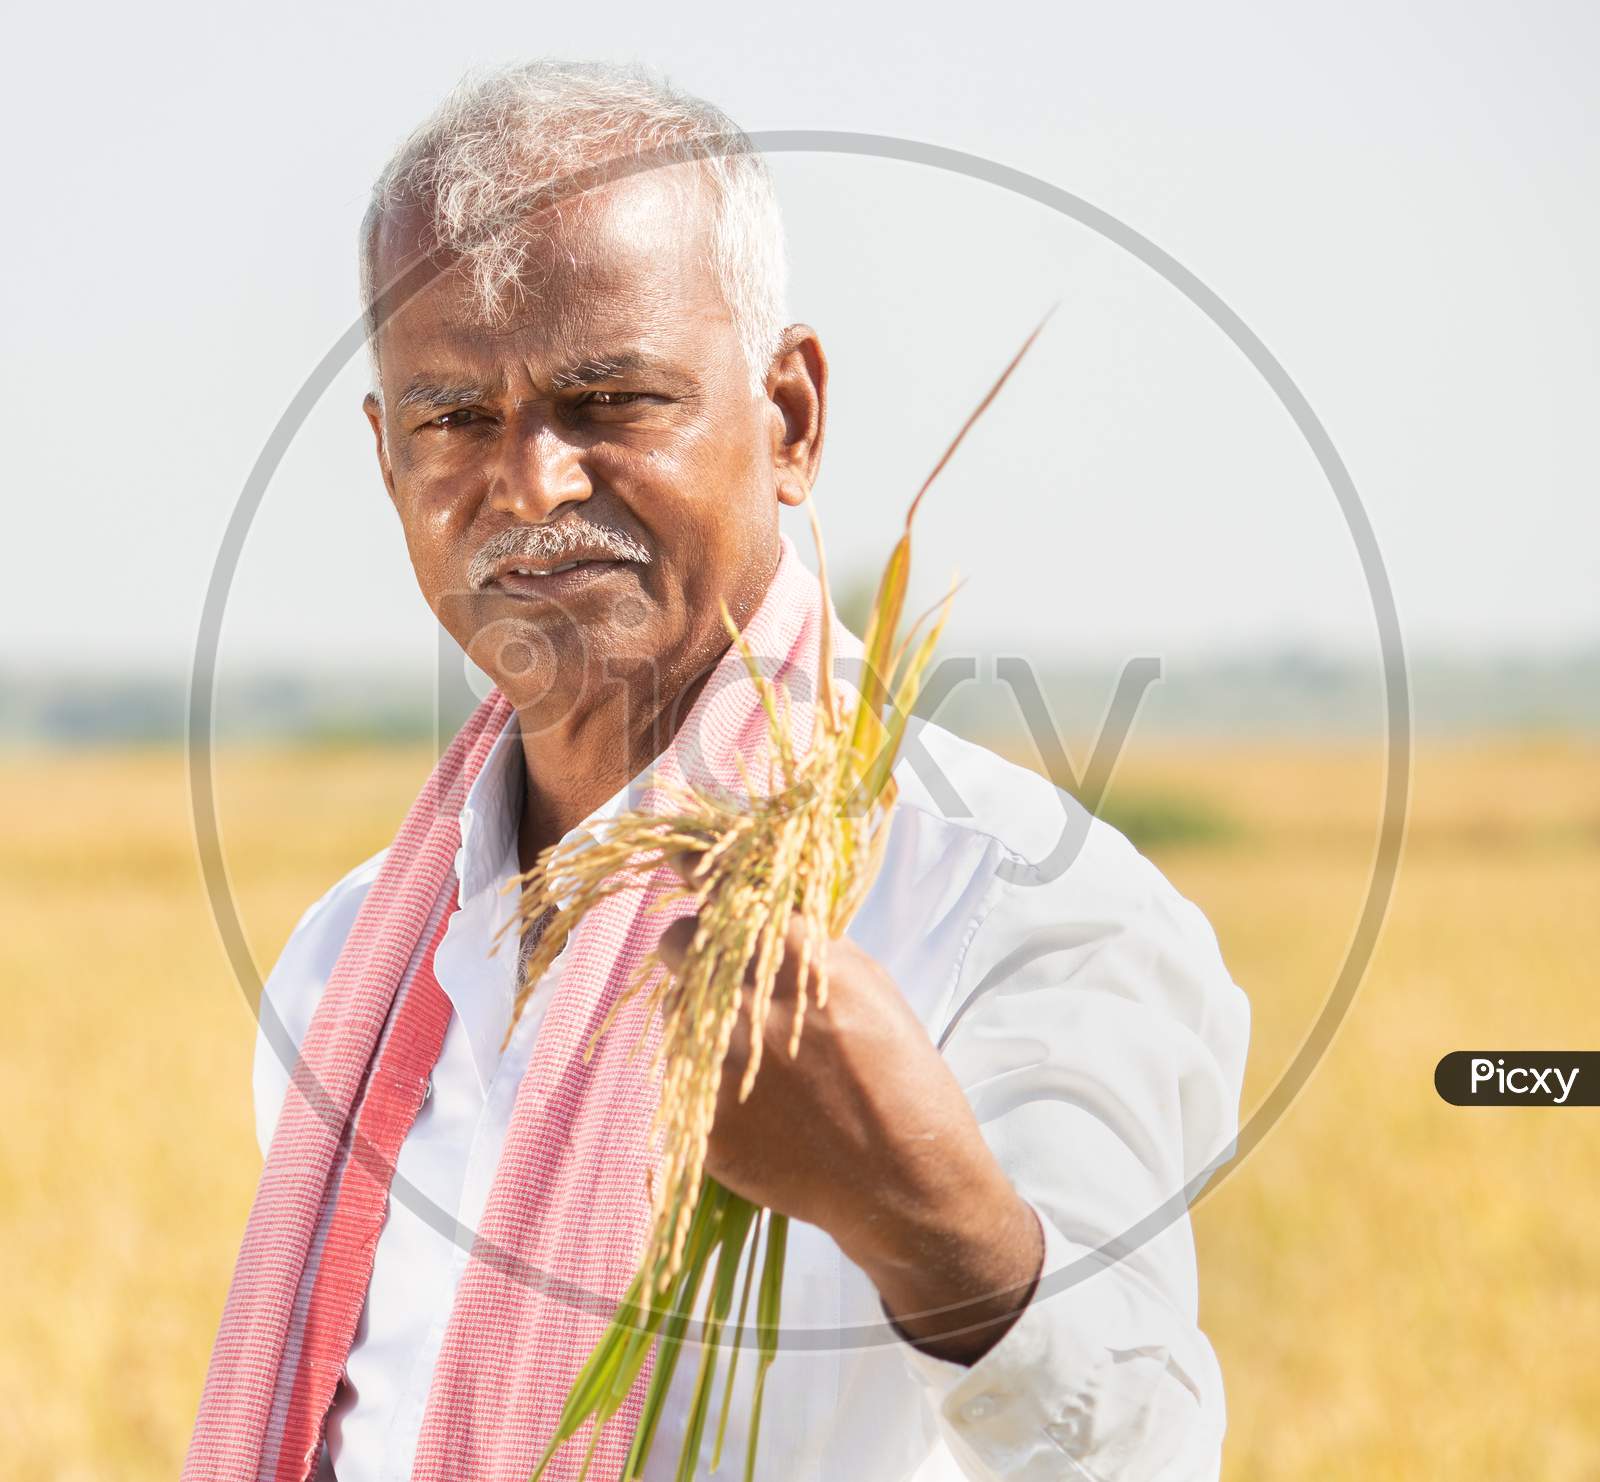 Smiling Indian Farmer In Hot Sunny Day Holding Paddy In Agriculture Field - Concept Of Bumper Crop During Monsoon Season